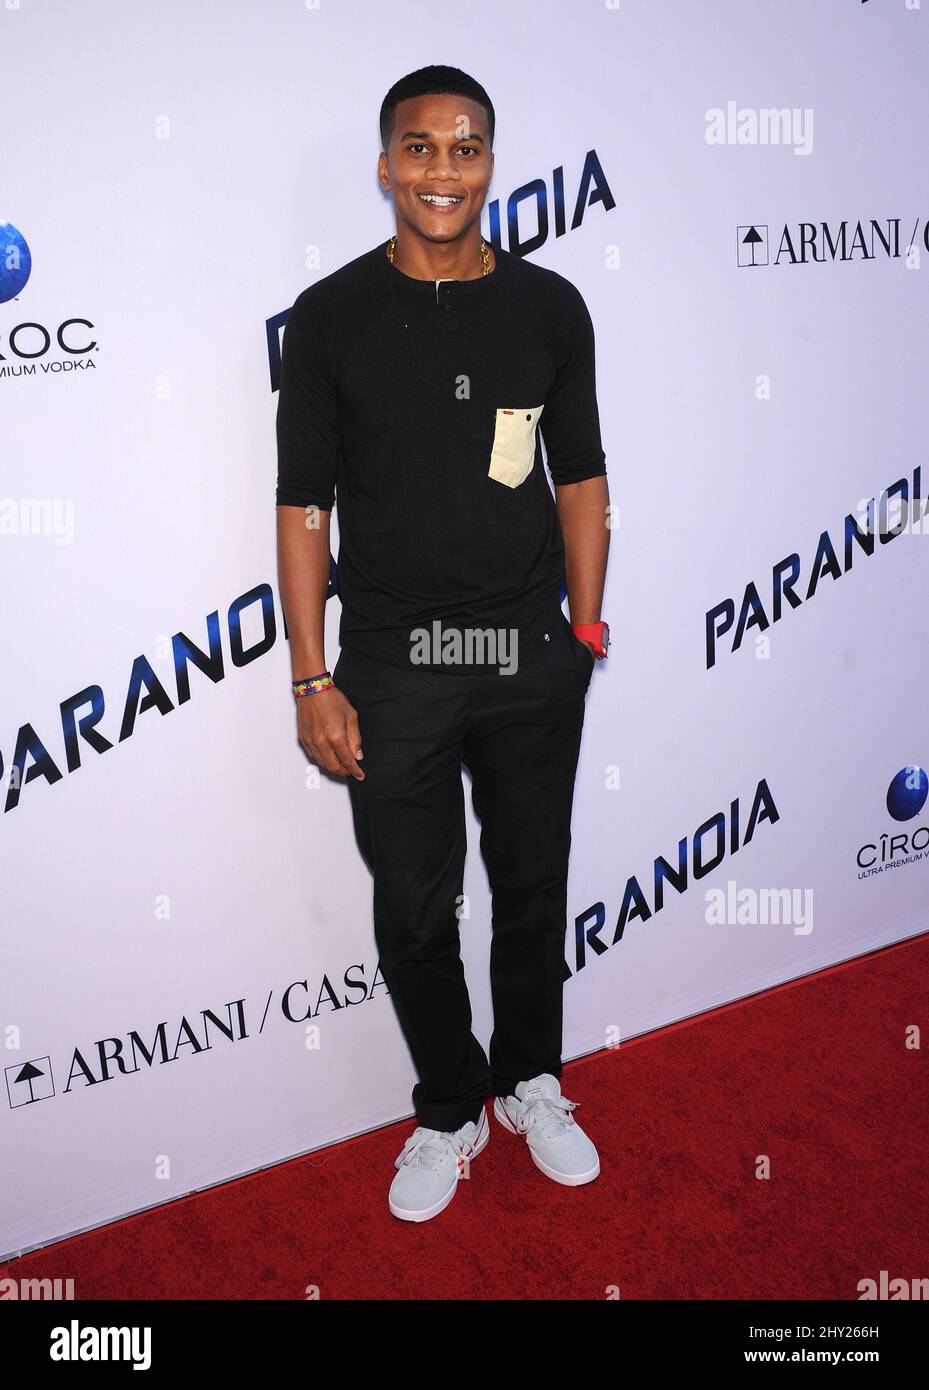 Cory Hardrict attends the 'Paranoia' US premiere held at the Directors Guild of America, Los Angeles. Stock Photo